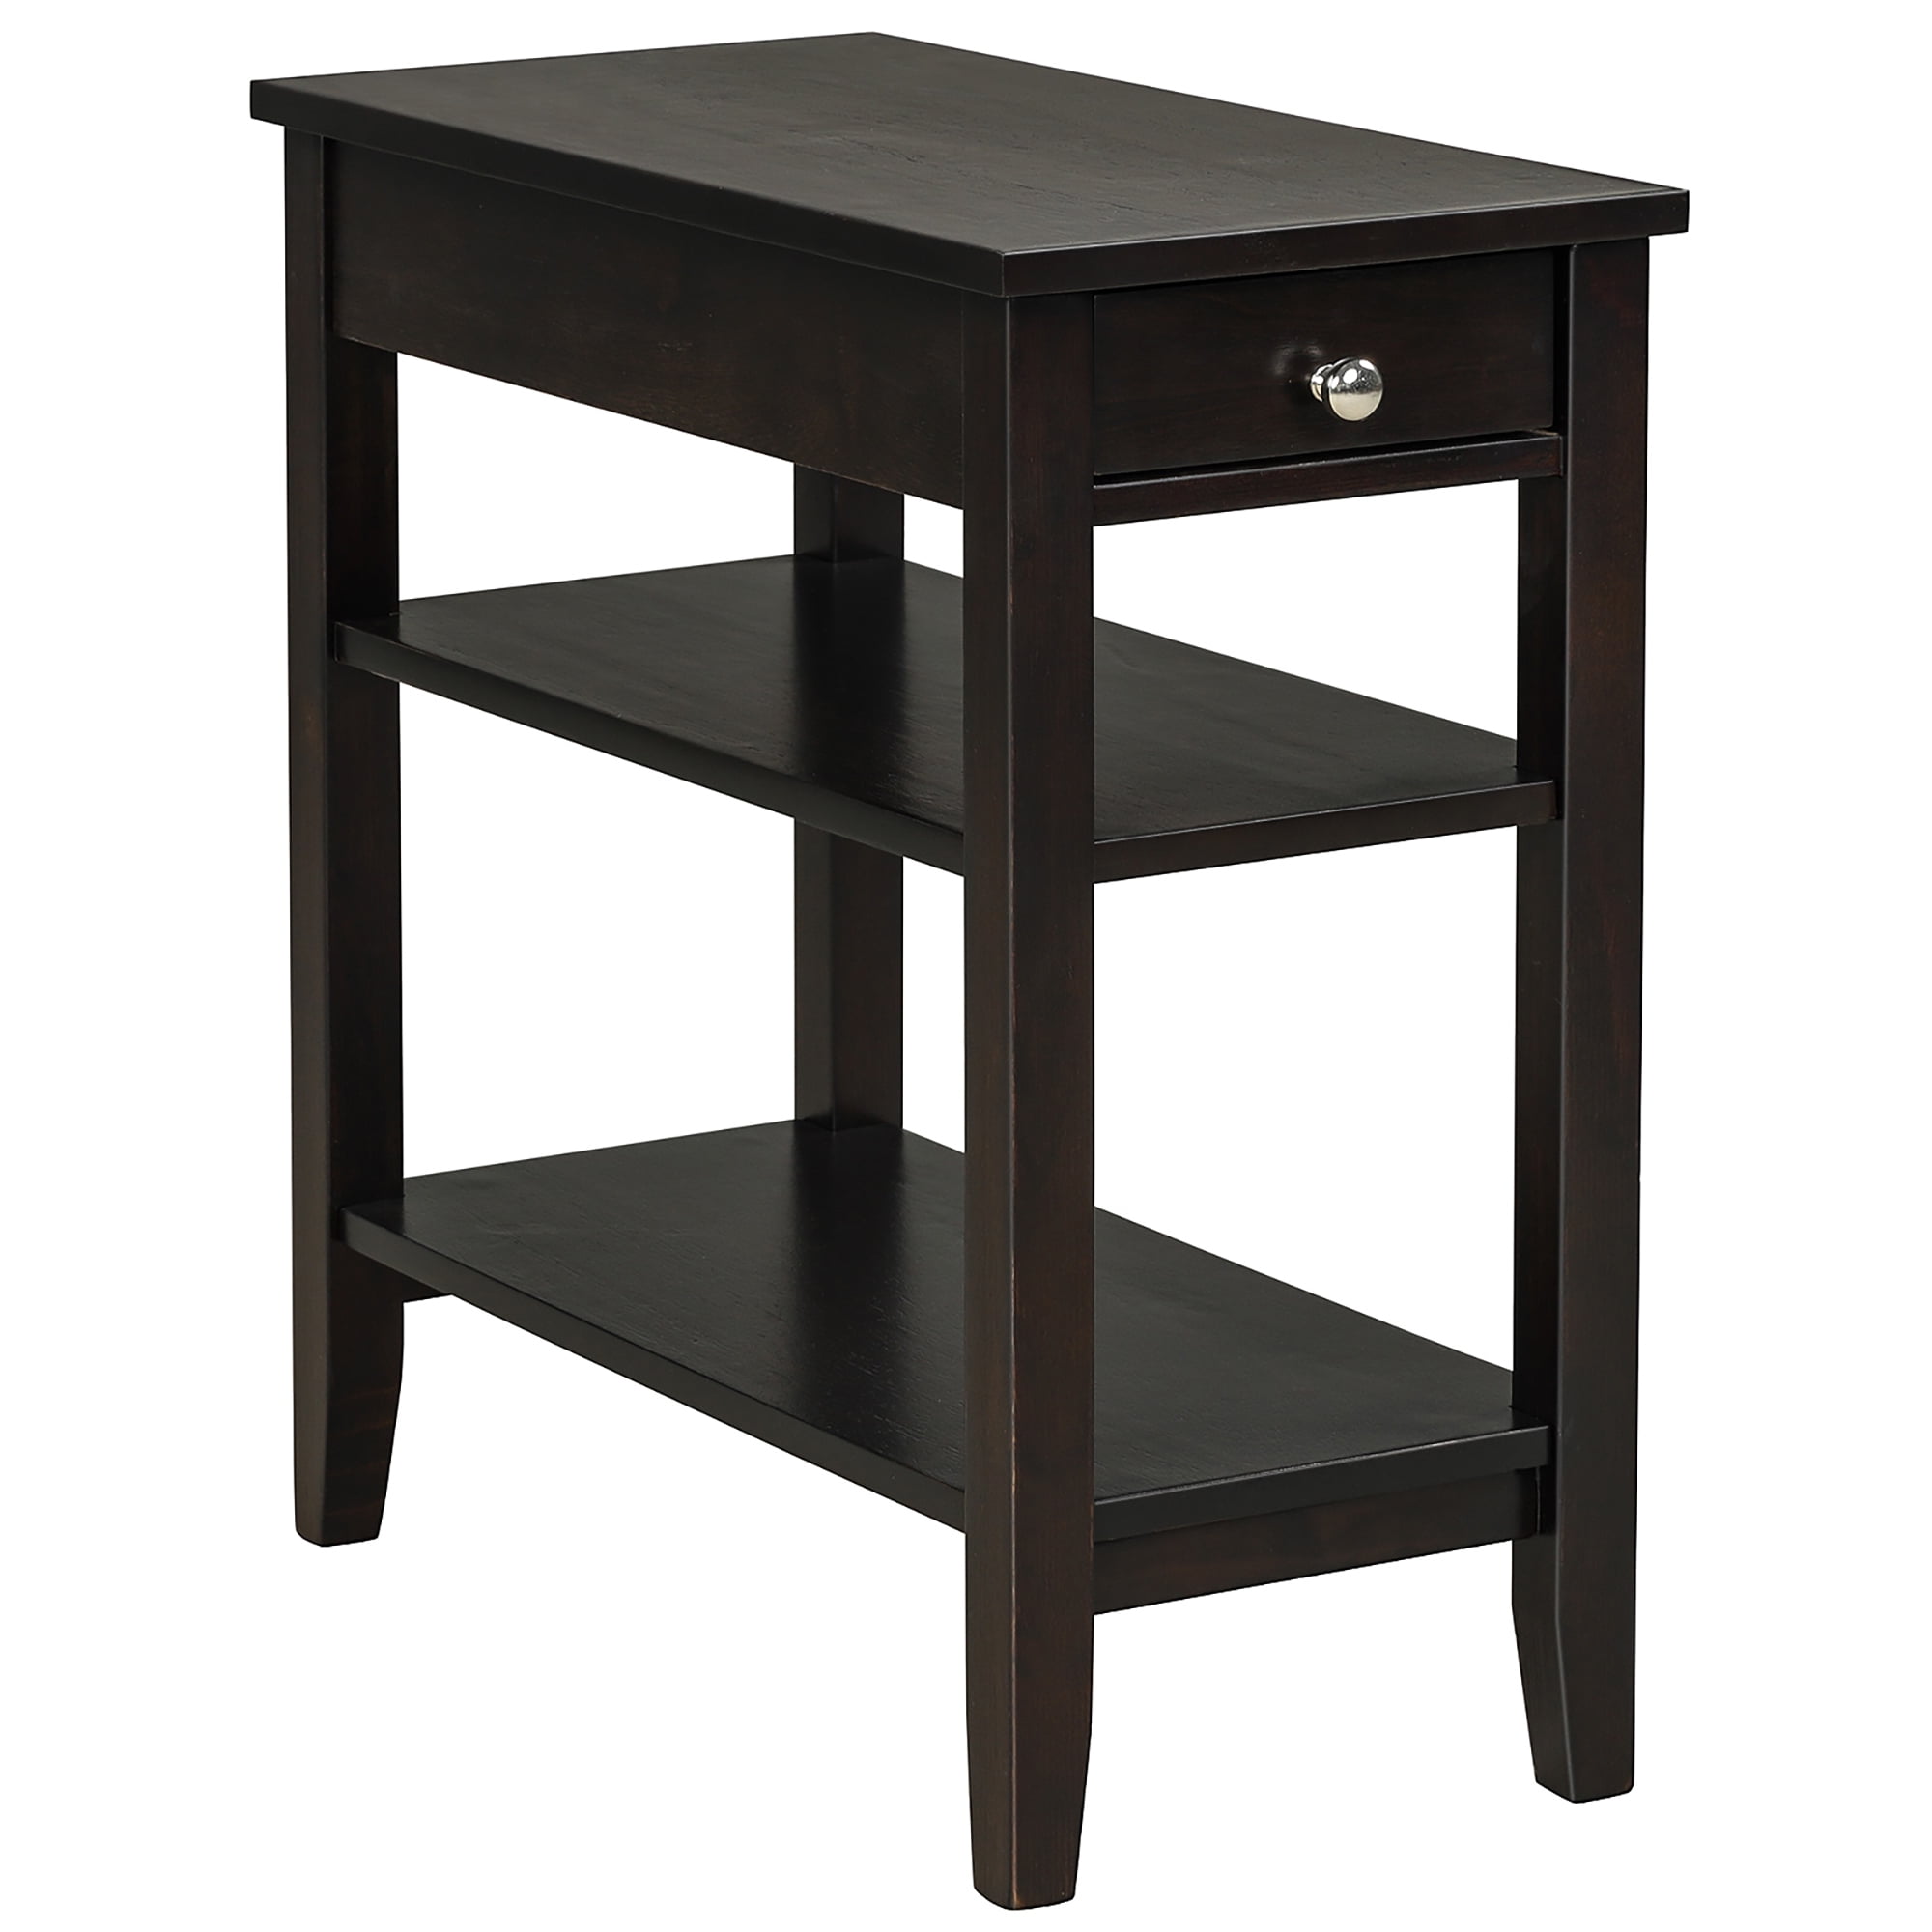 Greige HOOBRO Side Table Narrow End Table with Magazine Holder Sling Wood Look Accent Furniture with Metal Frame 18.9 x 9.4 x 24 Inch Industrial Nightstand for Small Spaces Black BG41BZ01